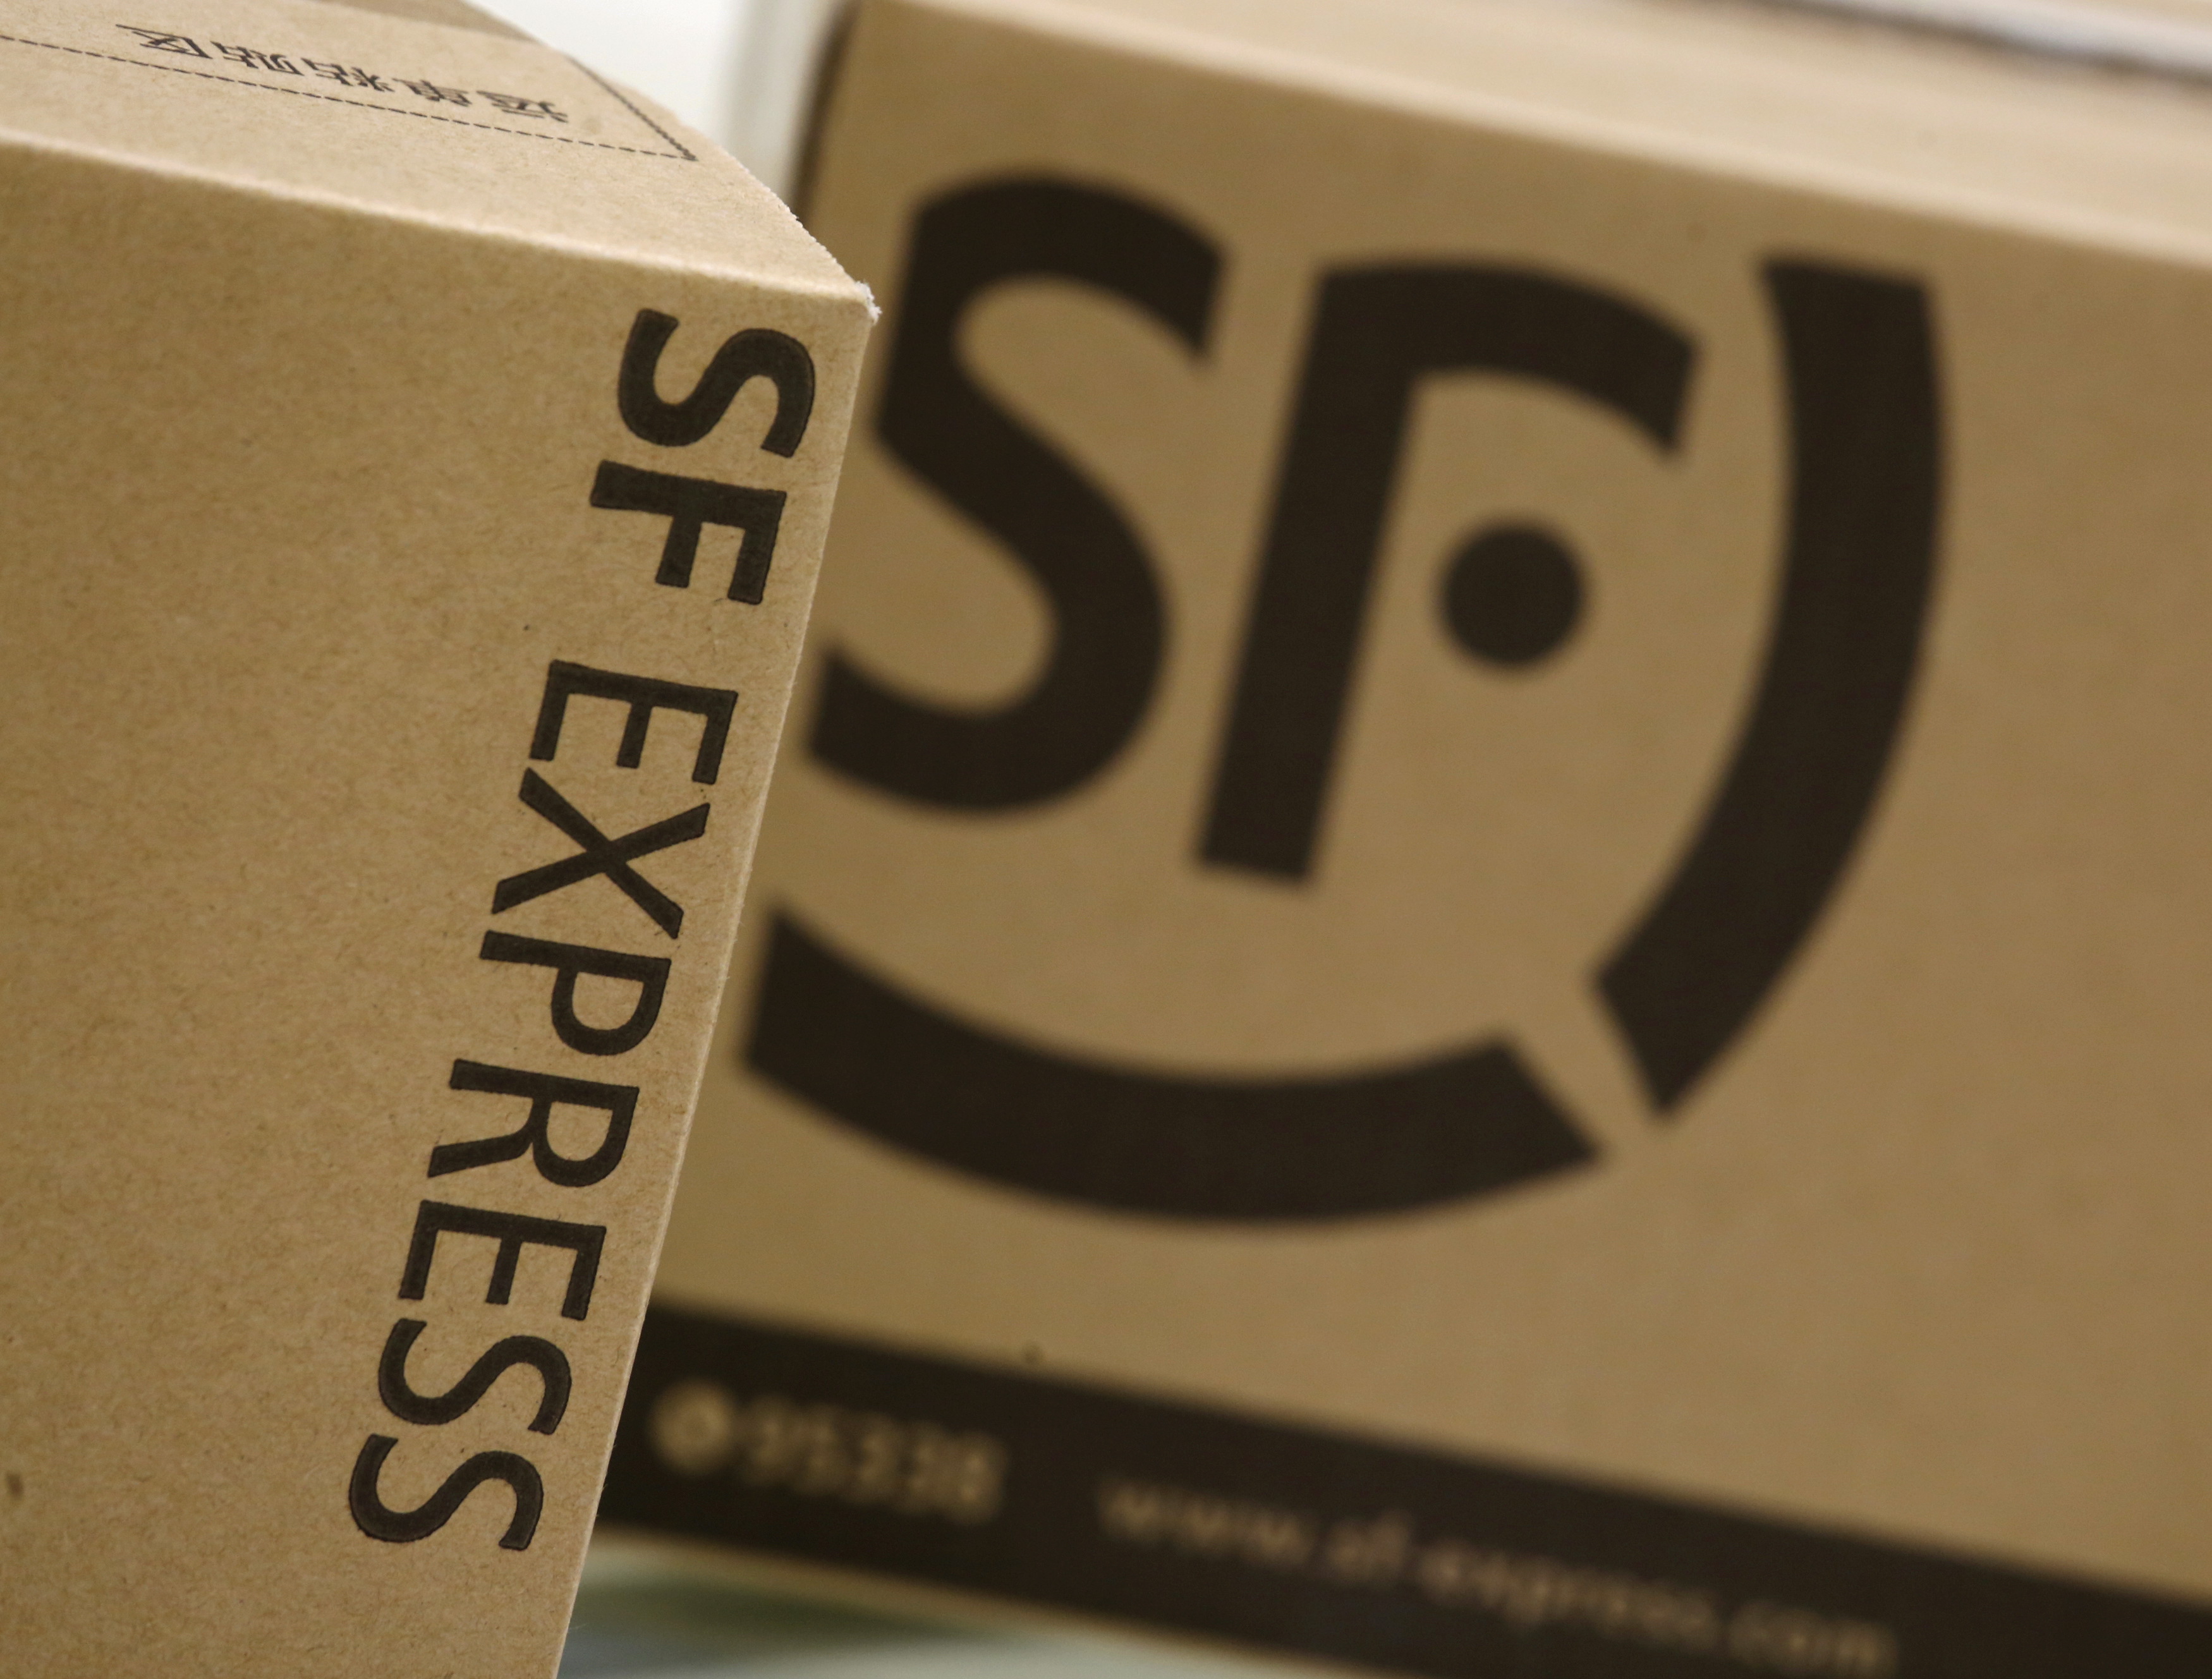 SF Express courier boxes are displayed in this illustration photo at the company's headquarters in Shenzhen